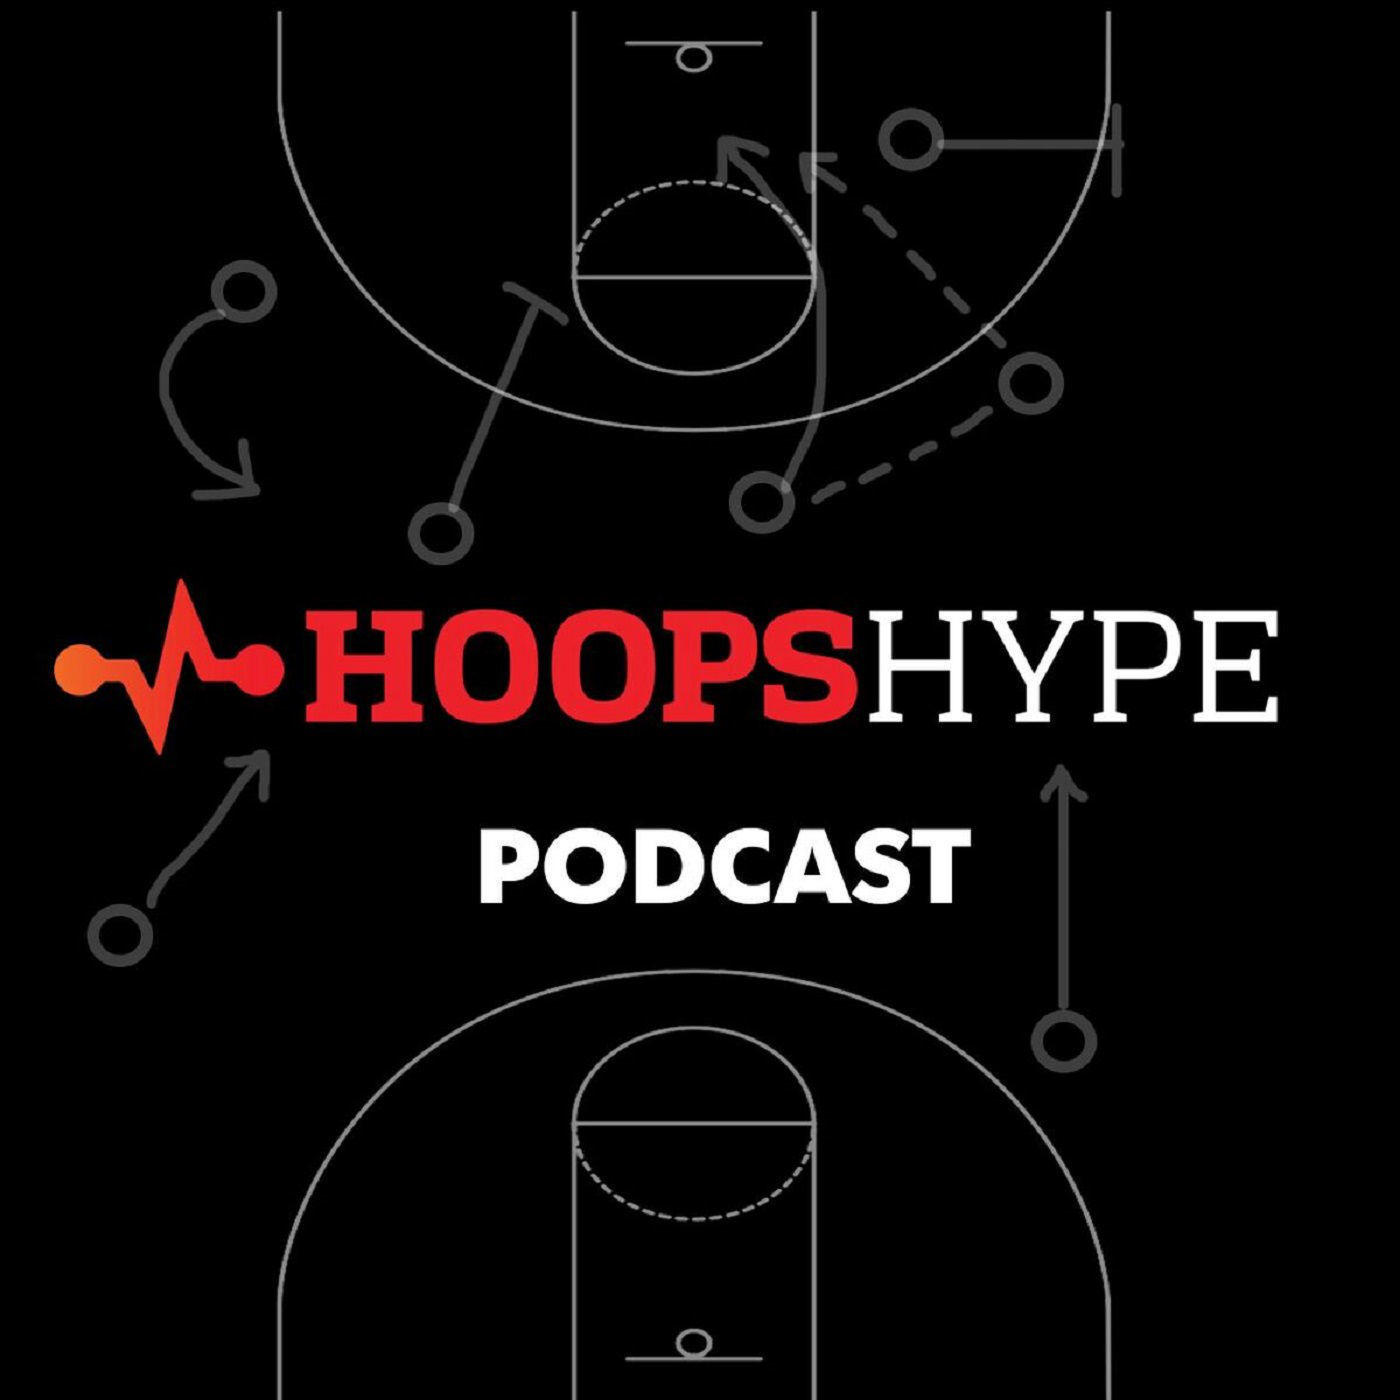 Michael Scotto and Anthony Puccio on the Steve Nash hiring, Nets trade candidates and more